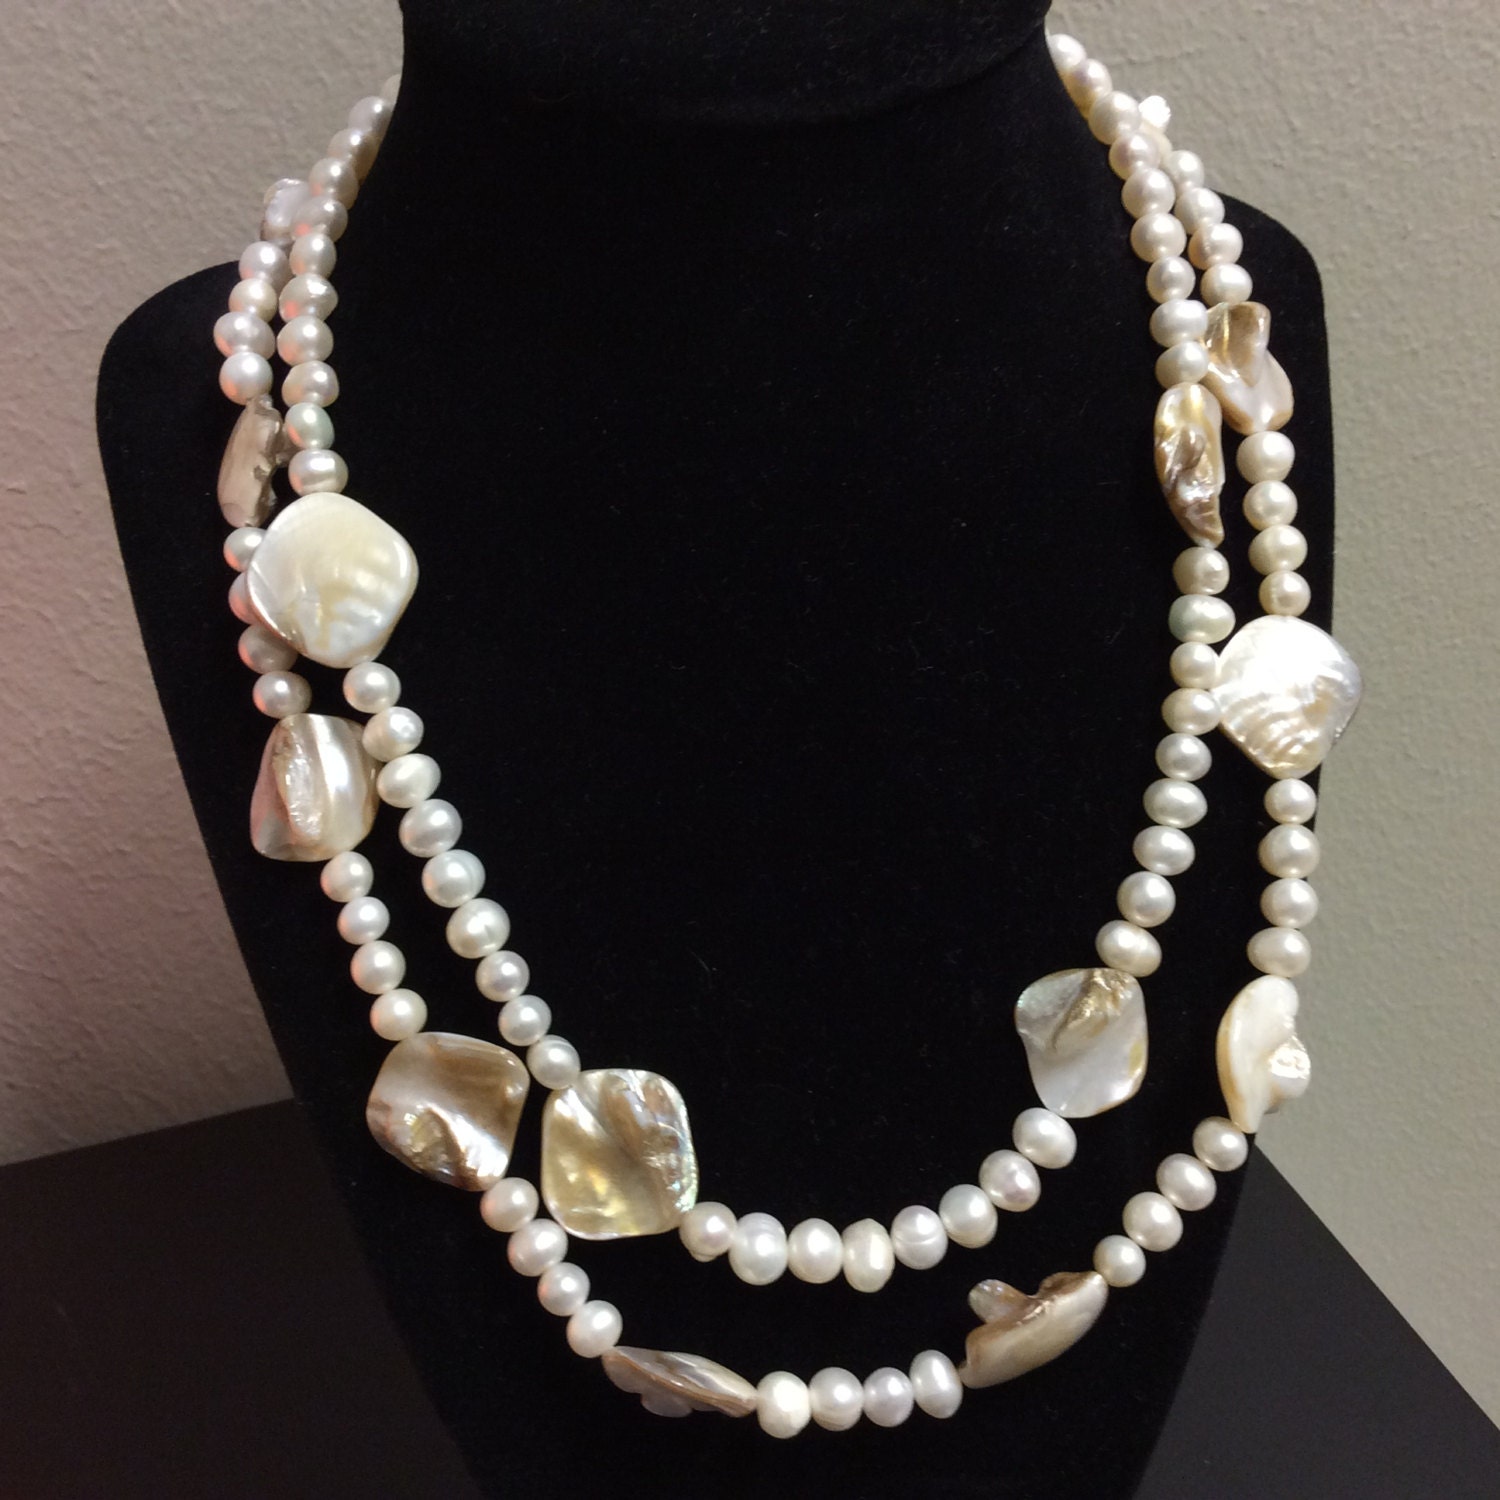 2 strands blister pearl and pearl necklace ladies necklace